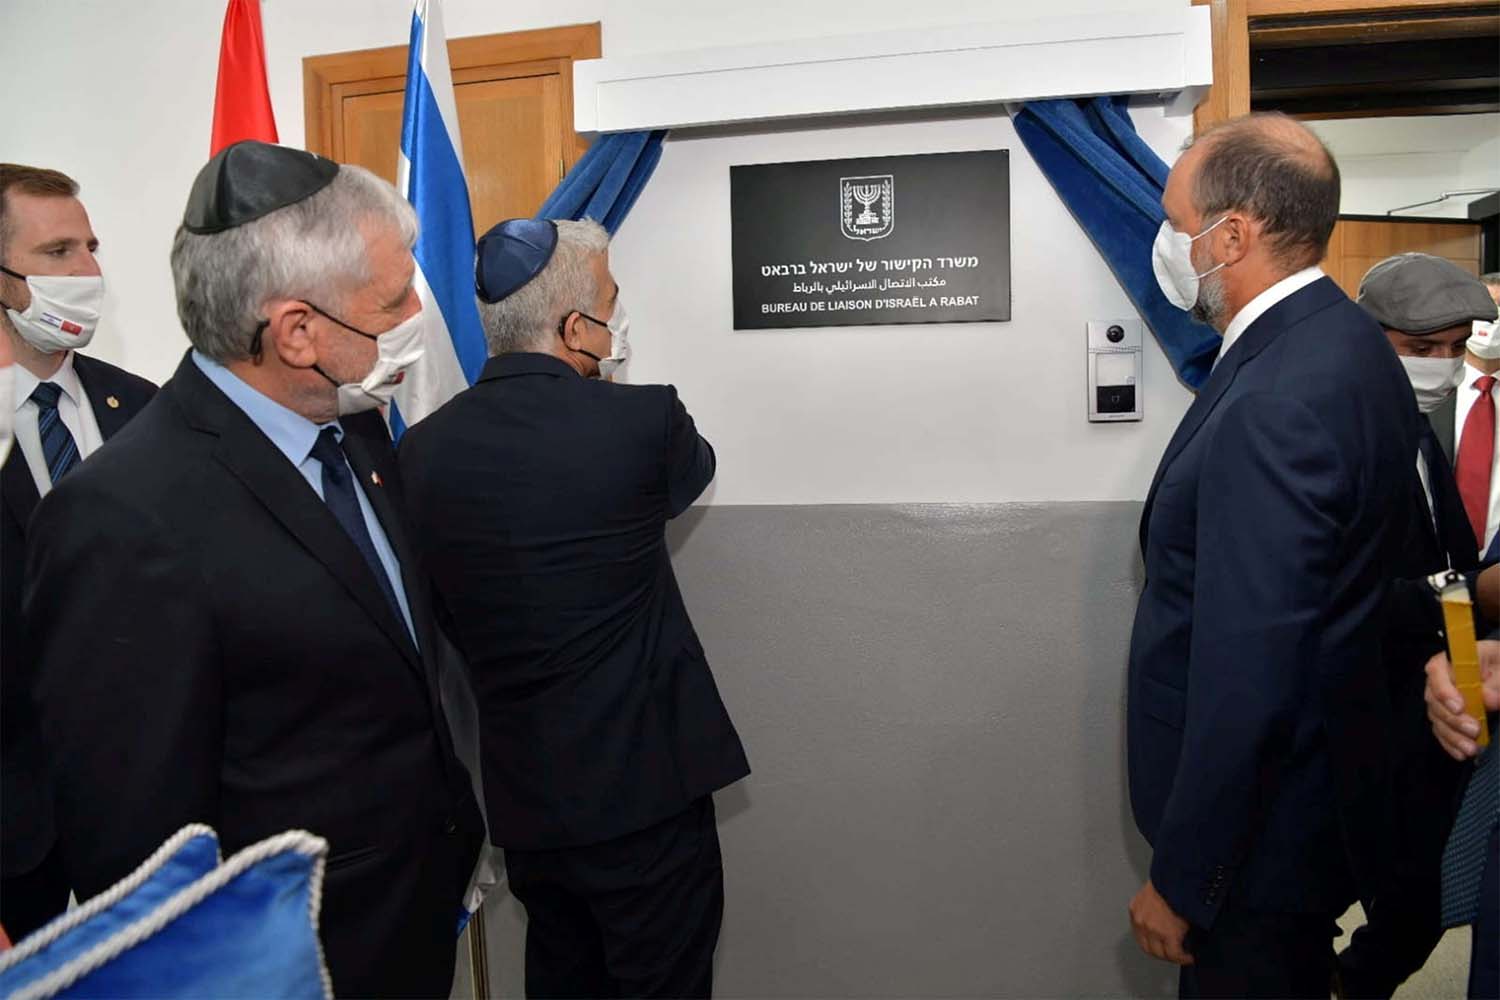 The opening of the Israeli liaison office in Rabat